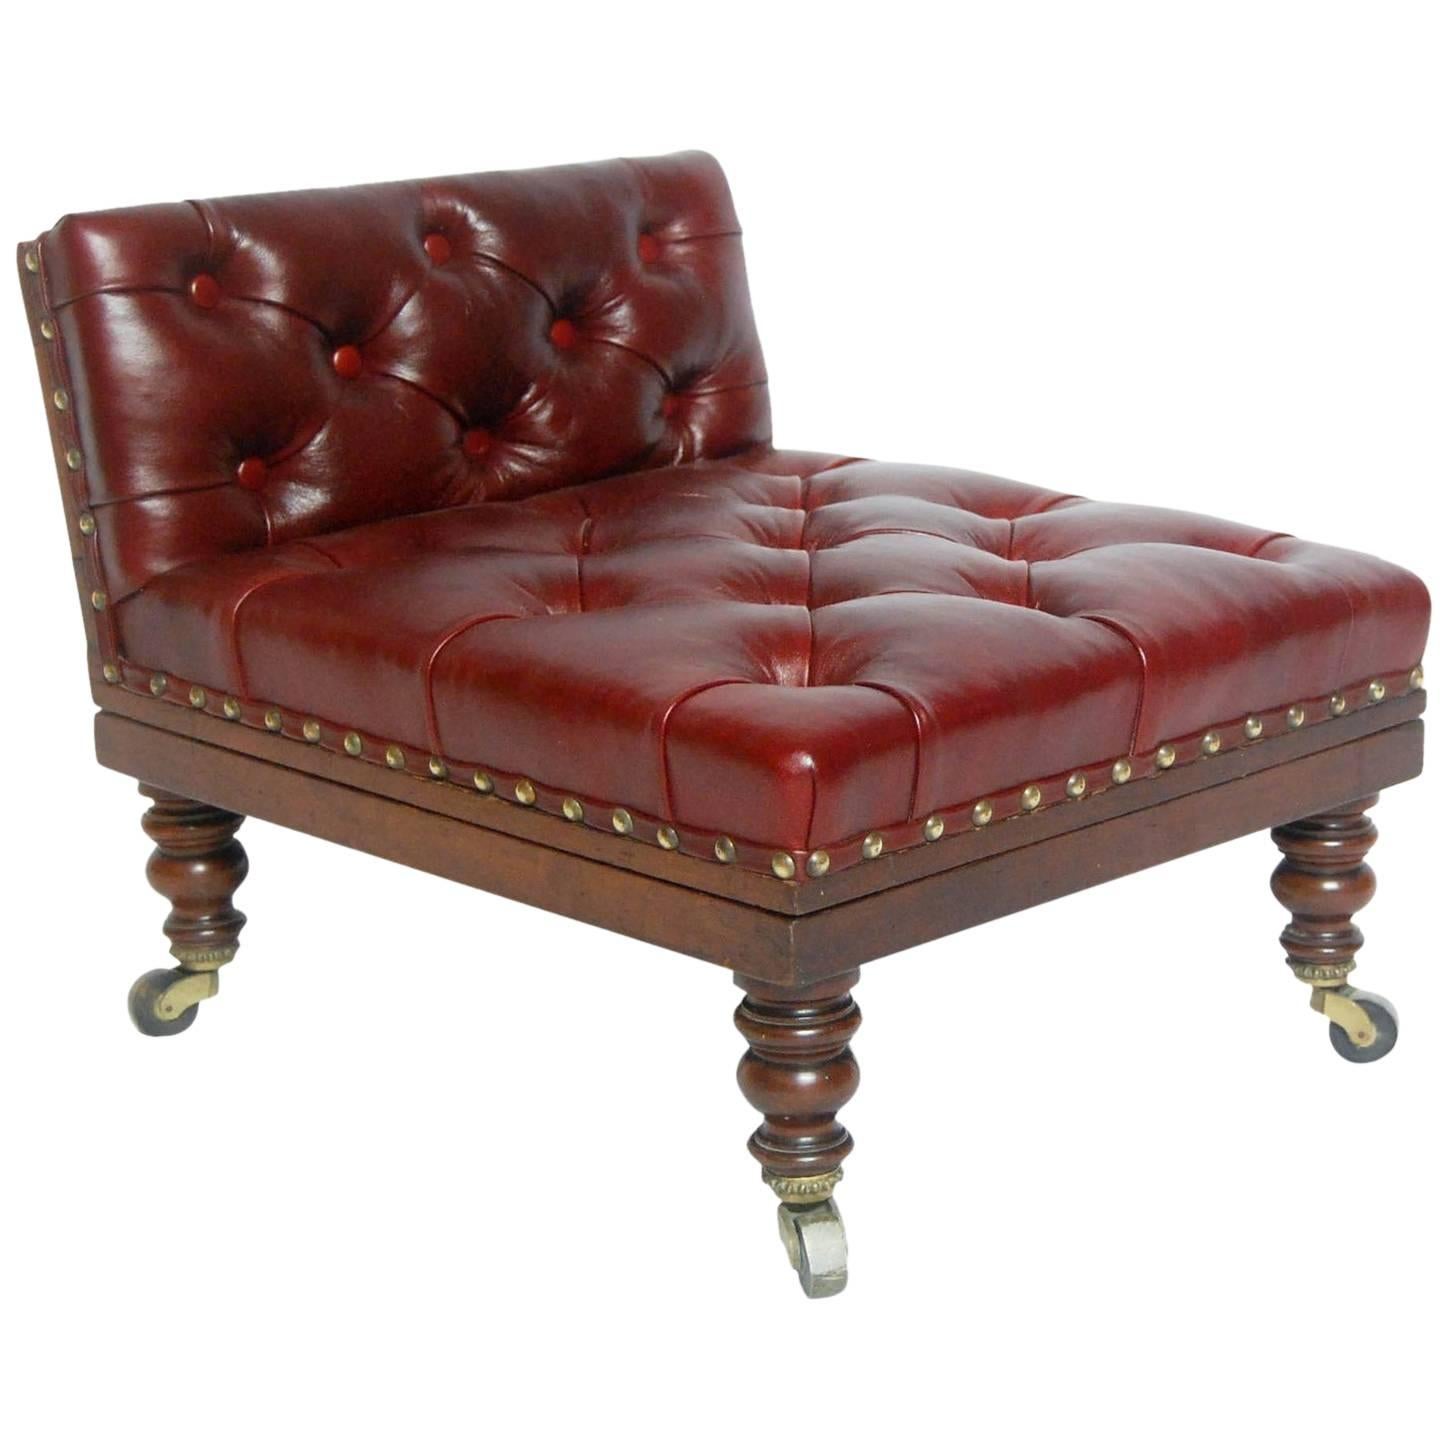 Late Victorian Mahogany Leather Gout Stool